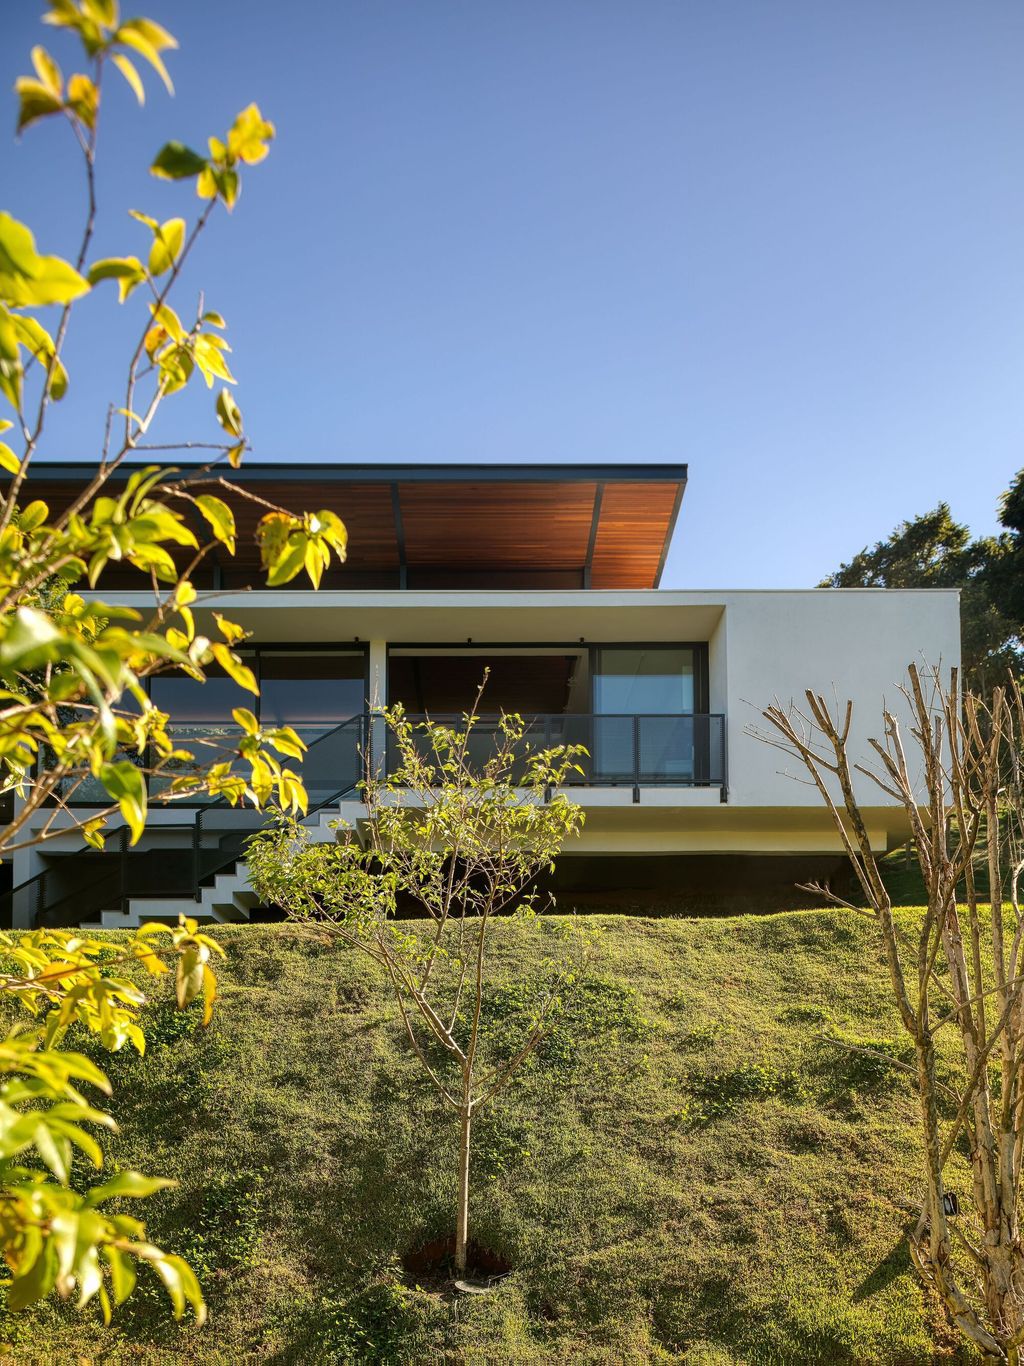 House-of-Stones-with-Stunning-Views-among-Nature-by-TETRO-Arquitetura-7